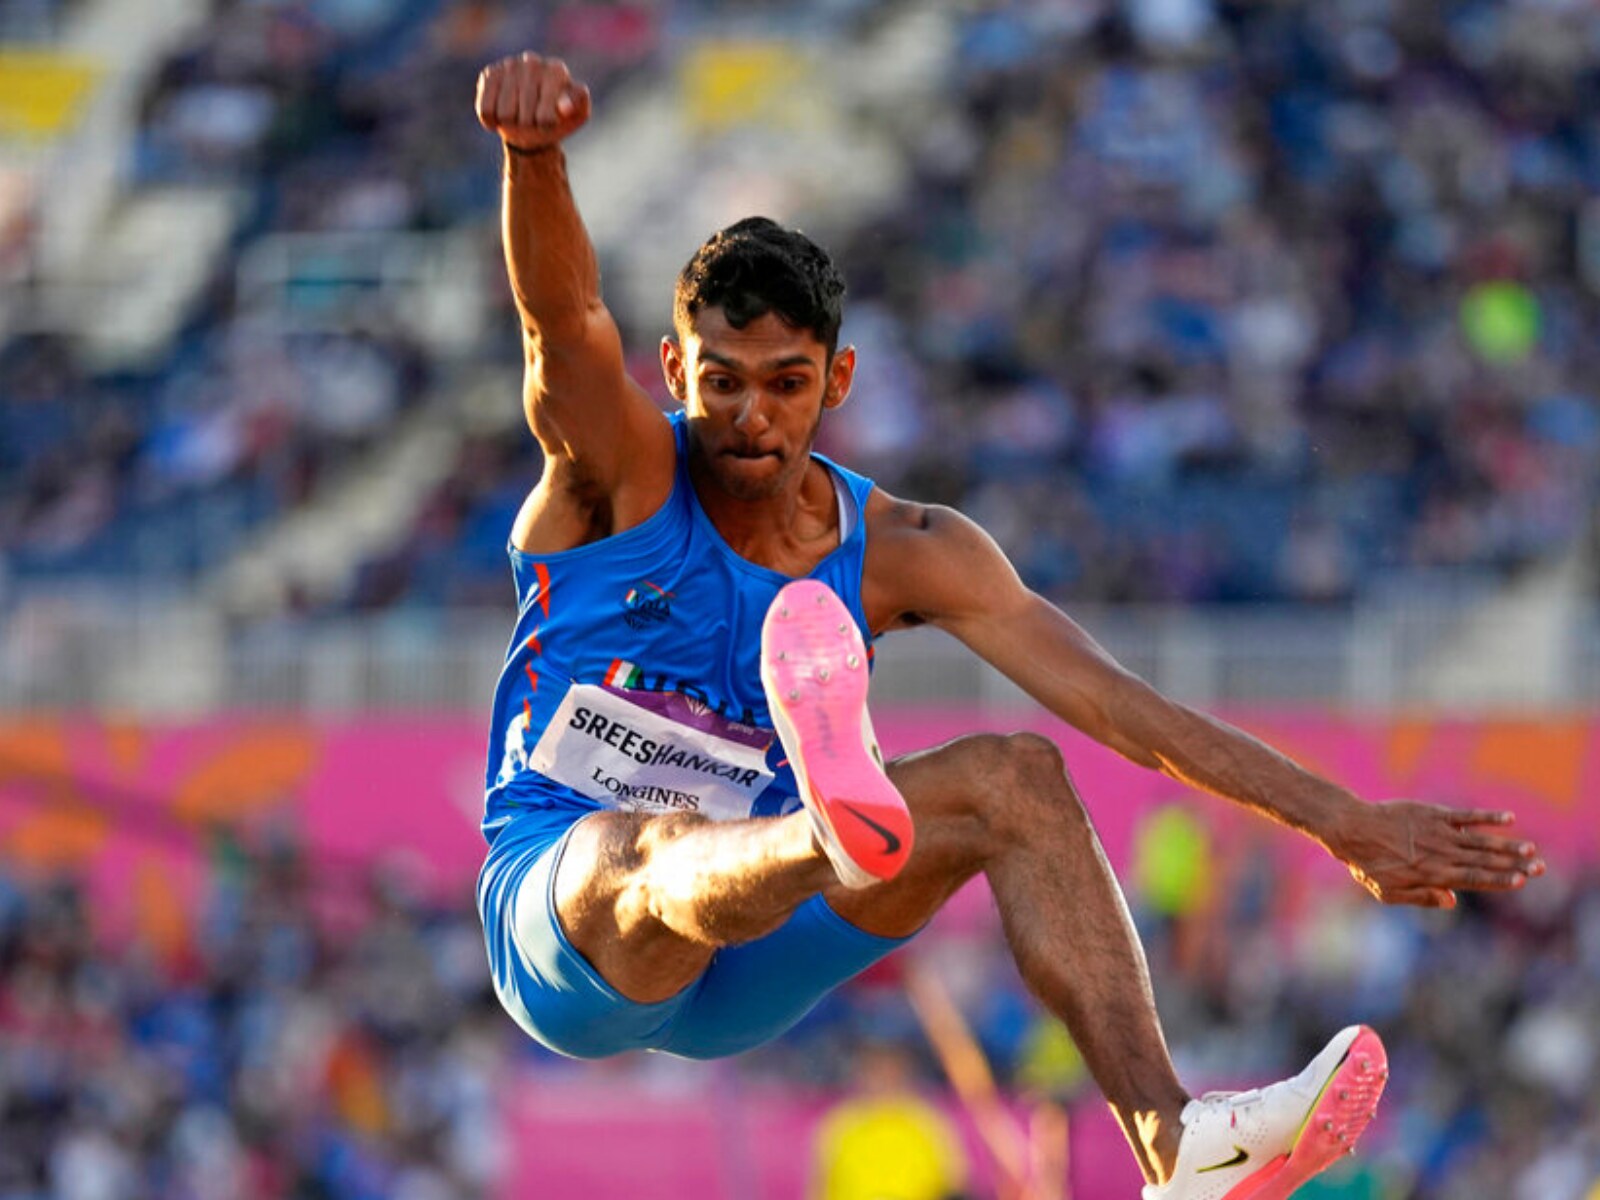 What makes the perfect…long jump?